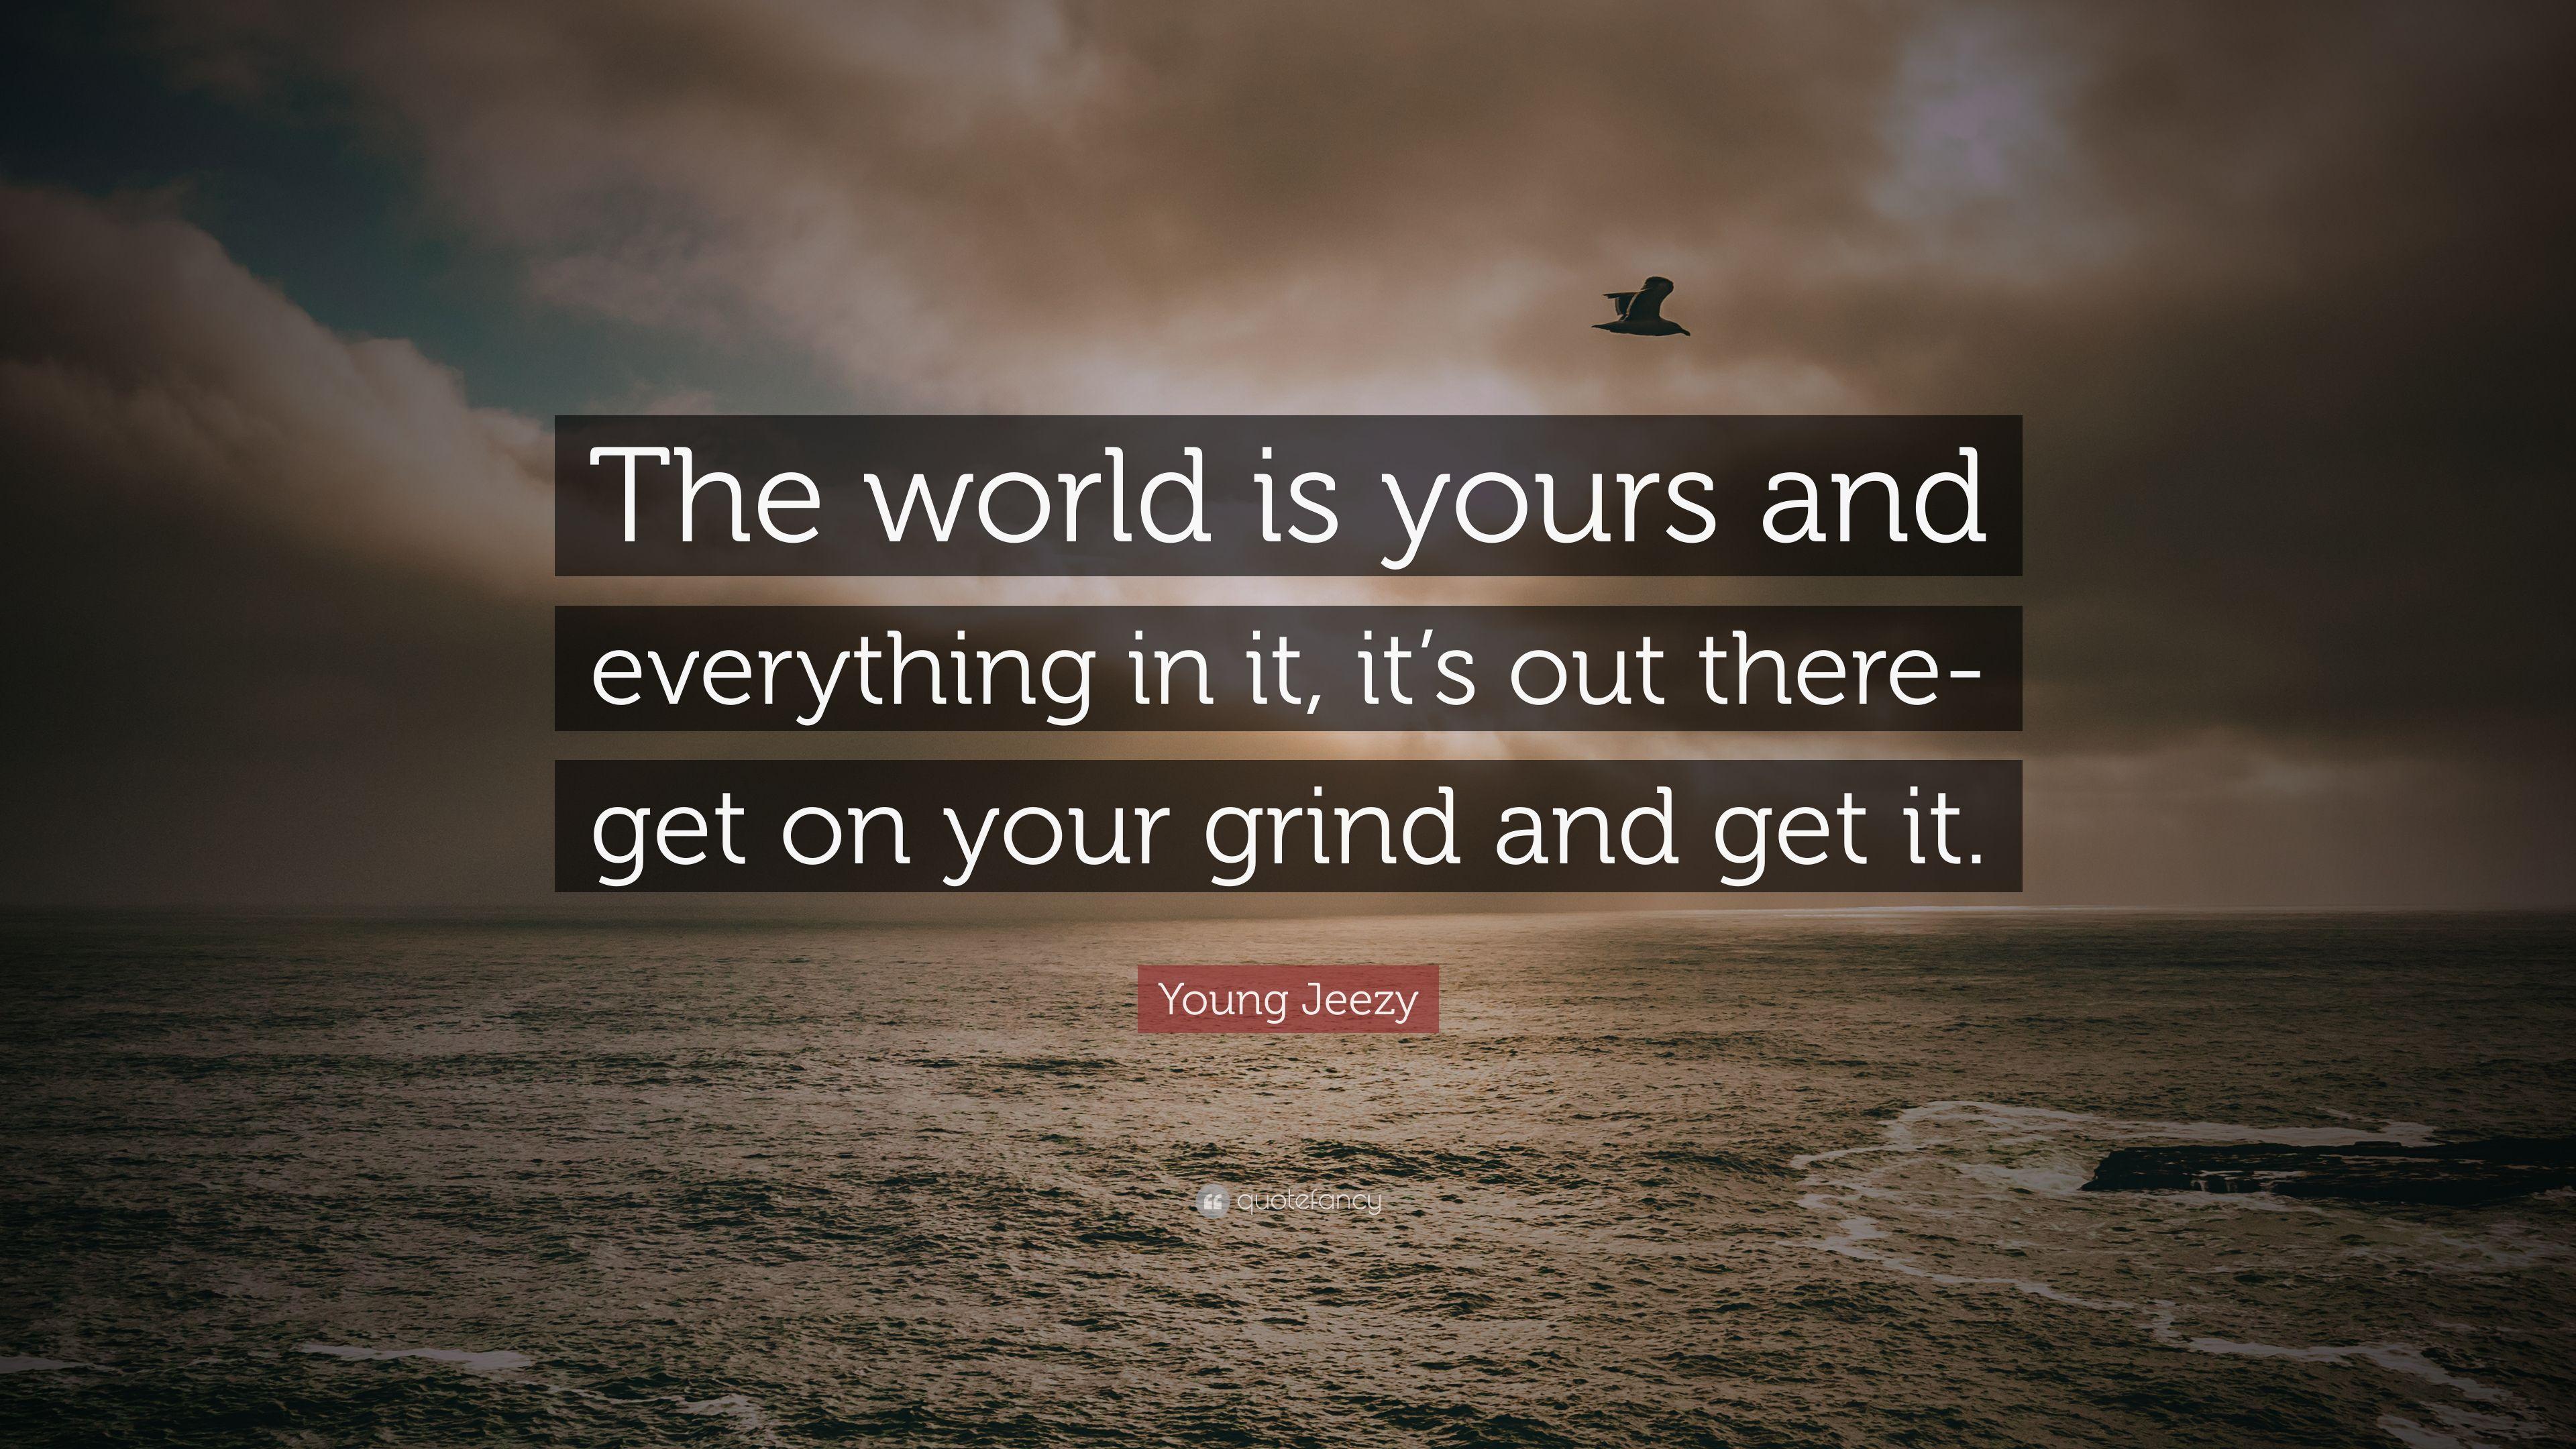 Great The World Is Yours Quotes of all time The ultimate guide 